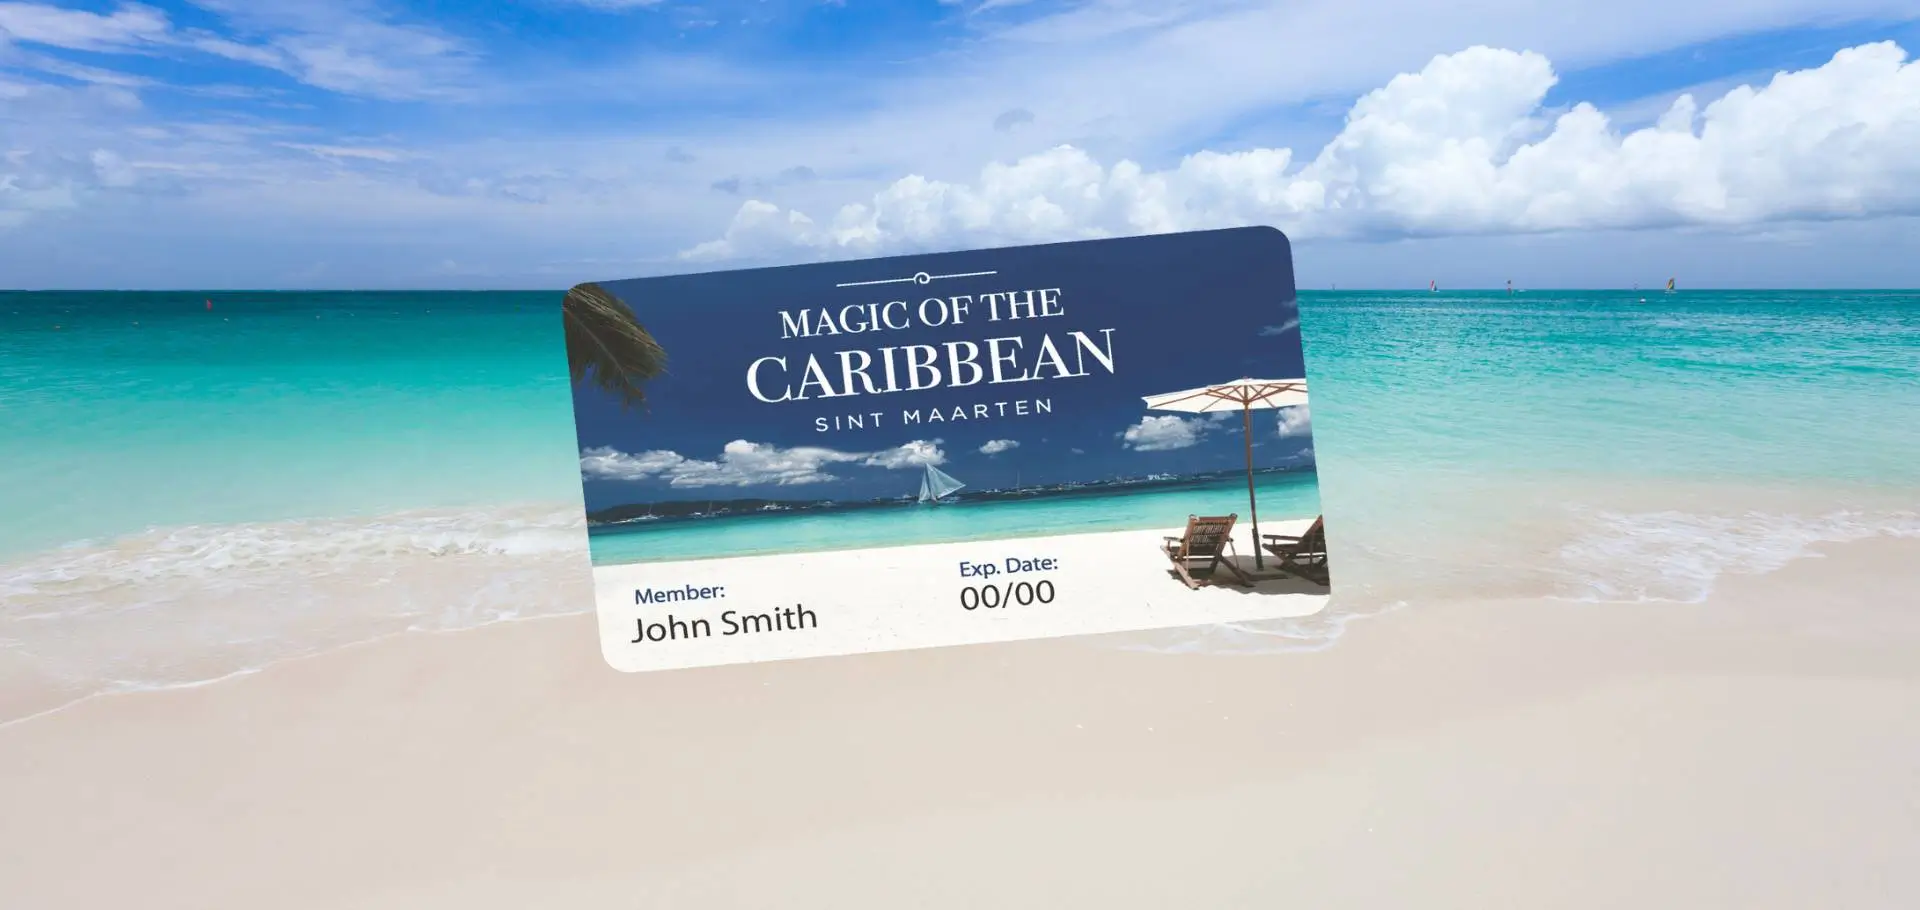 Heard about the Magic Of The Caribbean Card?